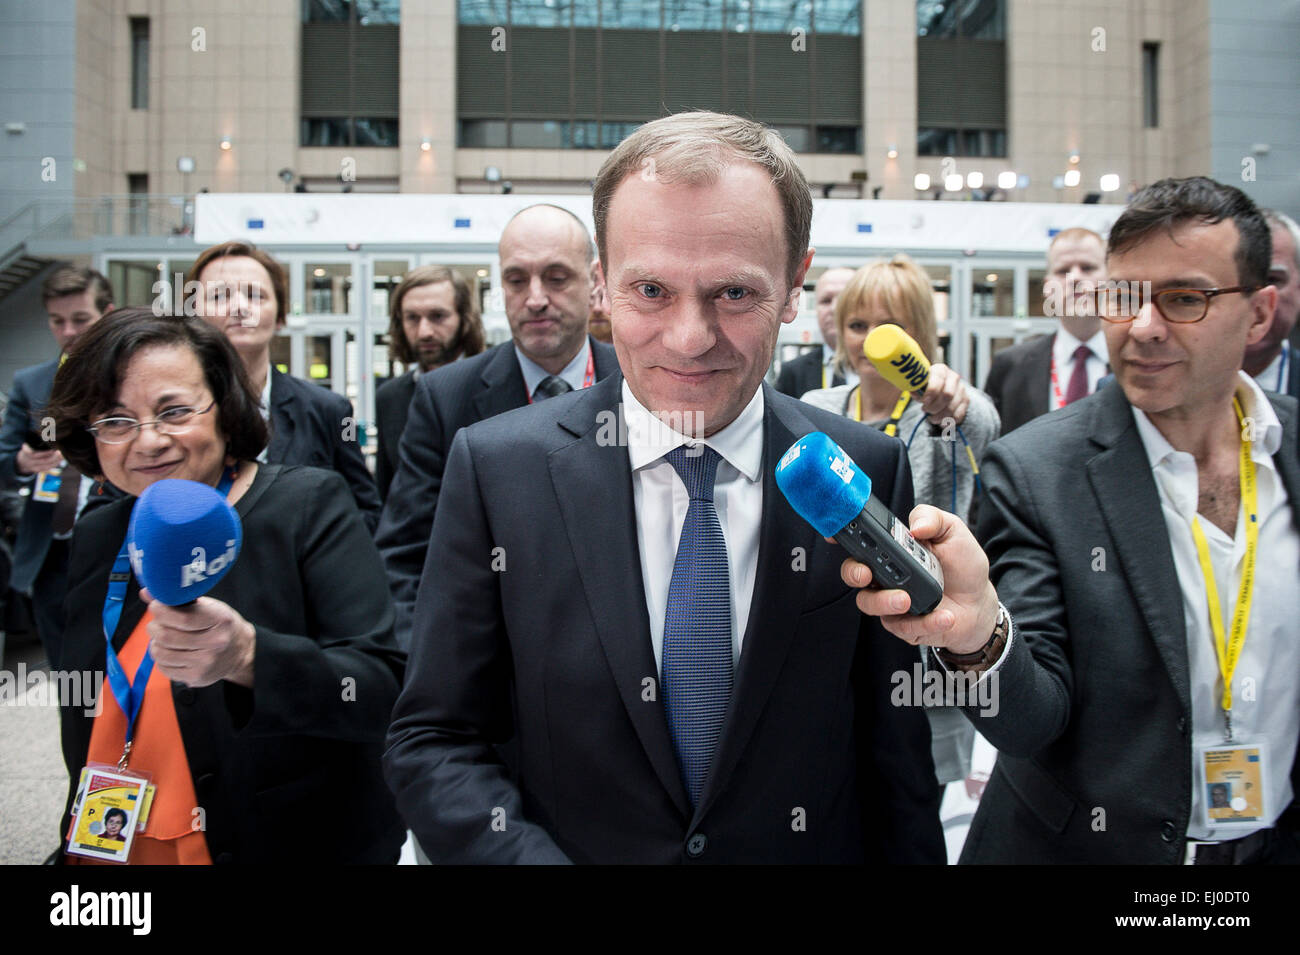 Brussels, Bxl, Belgium. 19th Mar, 2015. Donald Tusk, the president of the European Council arrive to the press conference ahead of the EU Summit in Brussels, Belgium on 19.03.2015 by Wiktor Dabkowski Credit:  Wiktor Dabkowski/ZUMA Wire/Alamy Live News Stock Photo